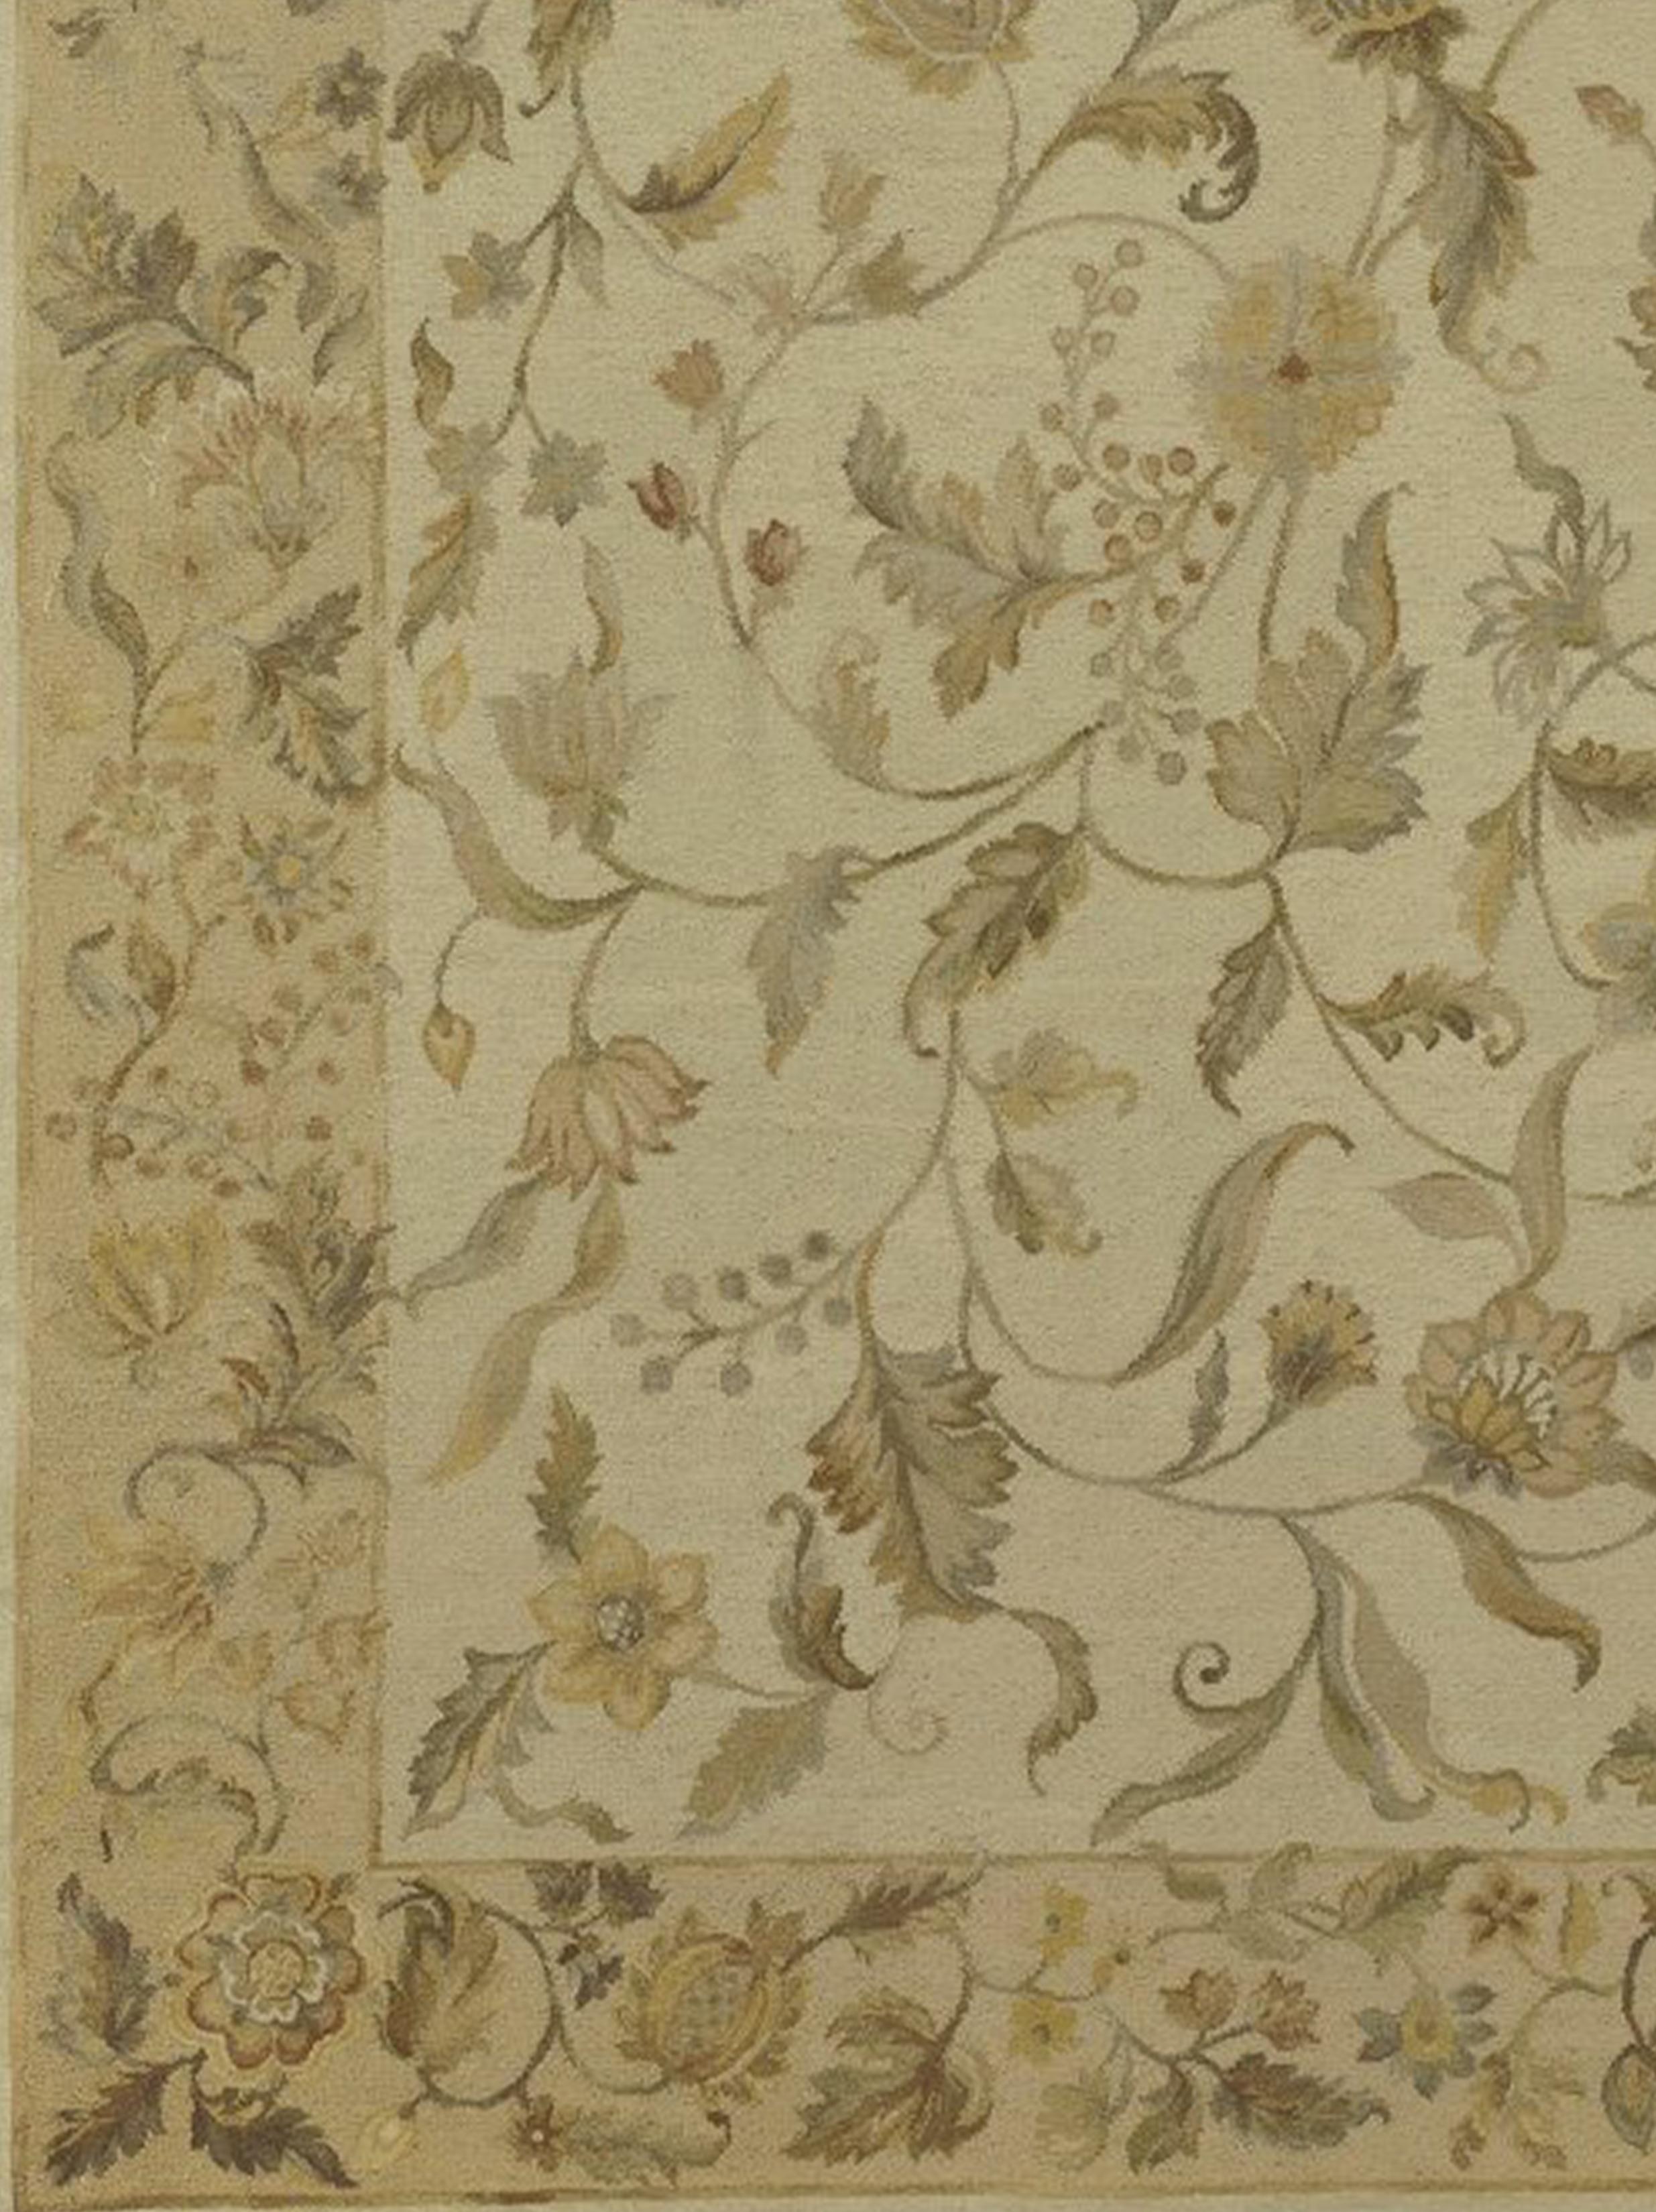 Gray-blue, dark sienna, khaki, green, yellow and gold fantasy botanical motifs on a yellow and gold background in a design based on an original Asmara painting by Elizabeth Moisan inspired by Jacobean embroideries and Pontremoli needlepoint rugs